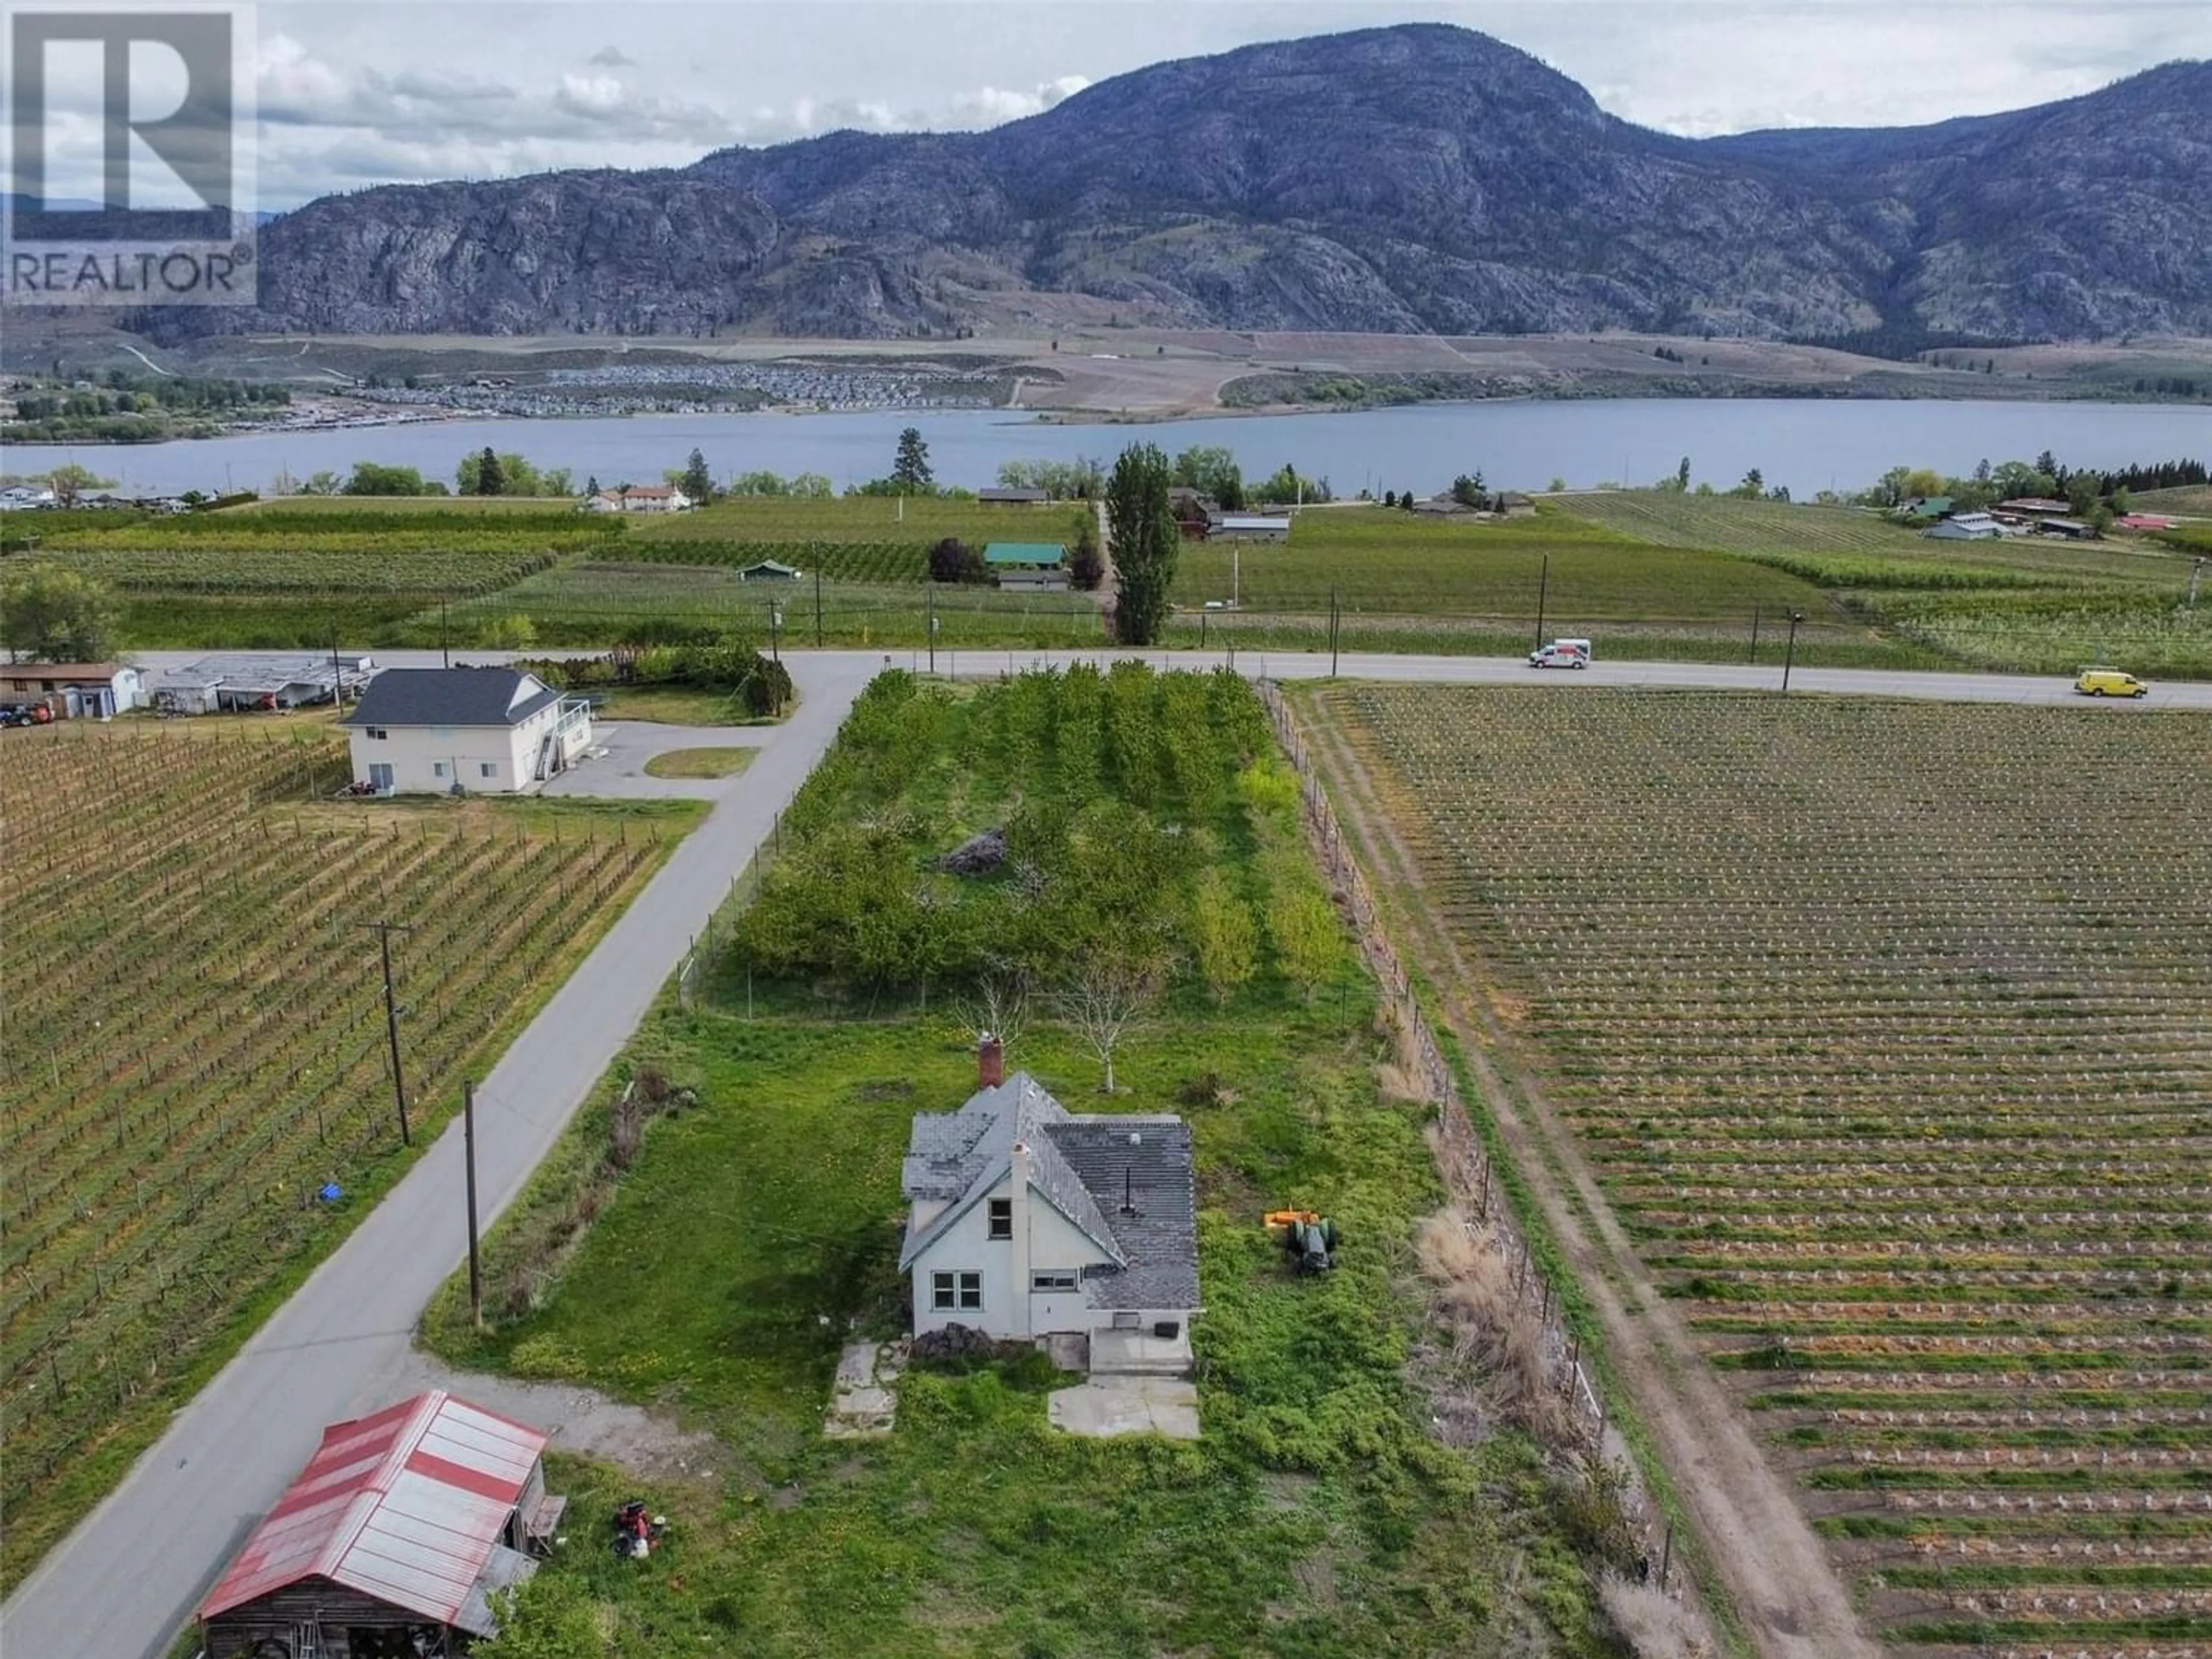 Lakeview for 9723 160TH Avenue, Osoyoos British Columbia V0H1V0